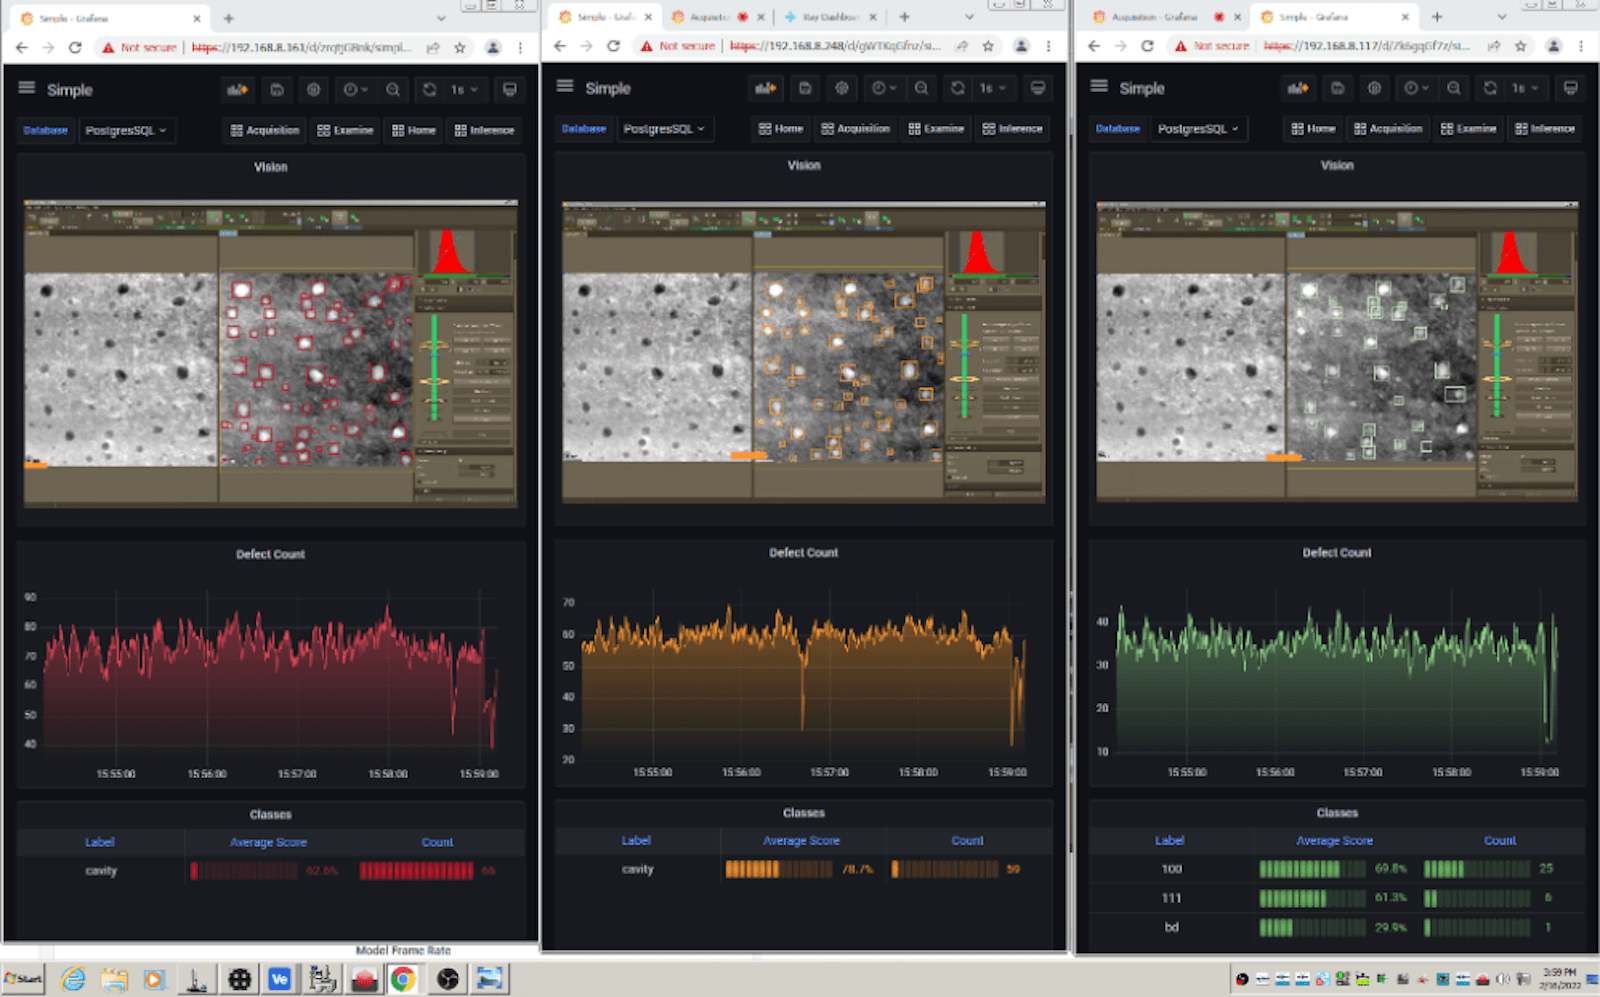 Grafana dashboards showing real-time microscopy image analysis 